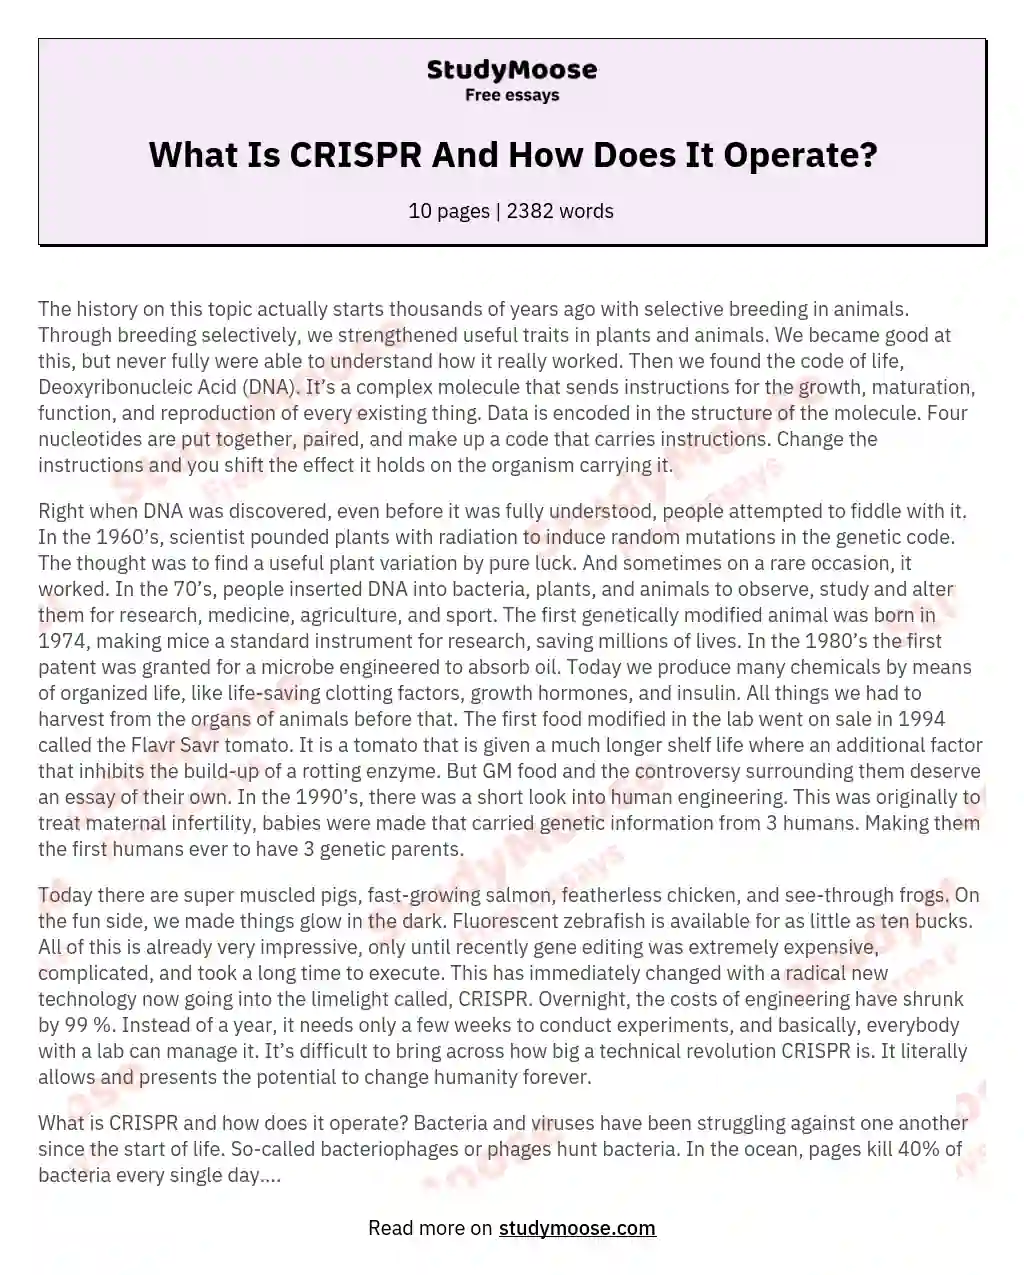 What Is CRISPR And How Does It Operate? essay